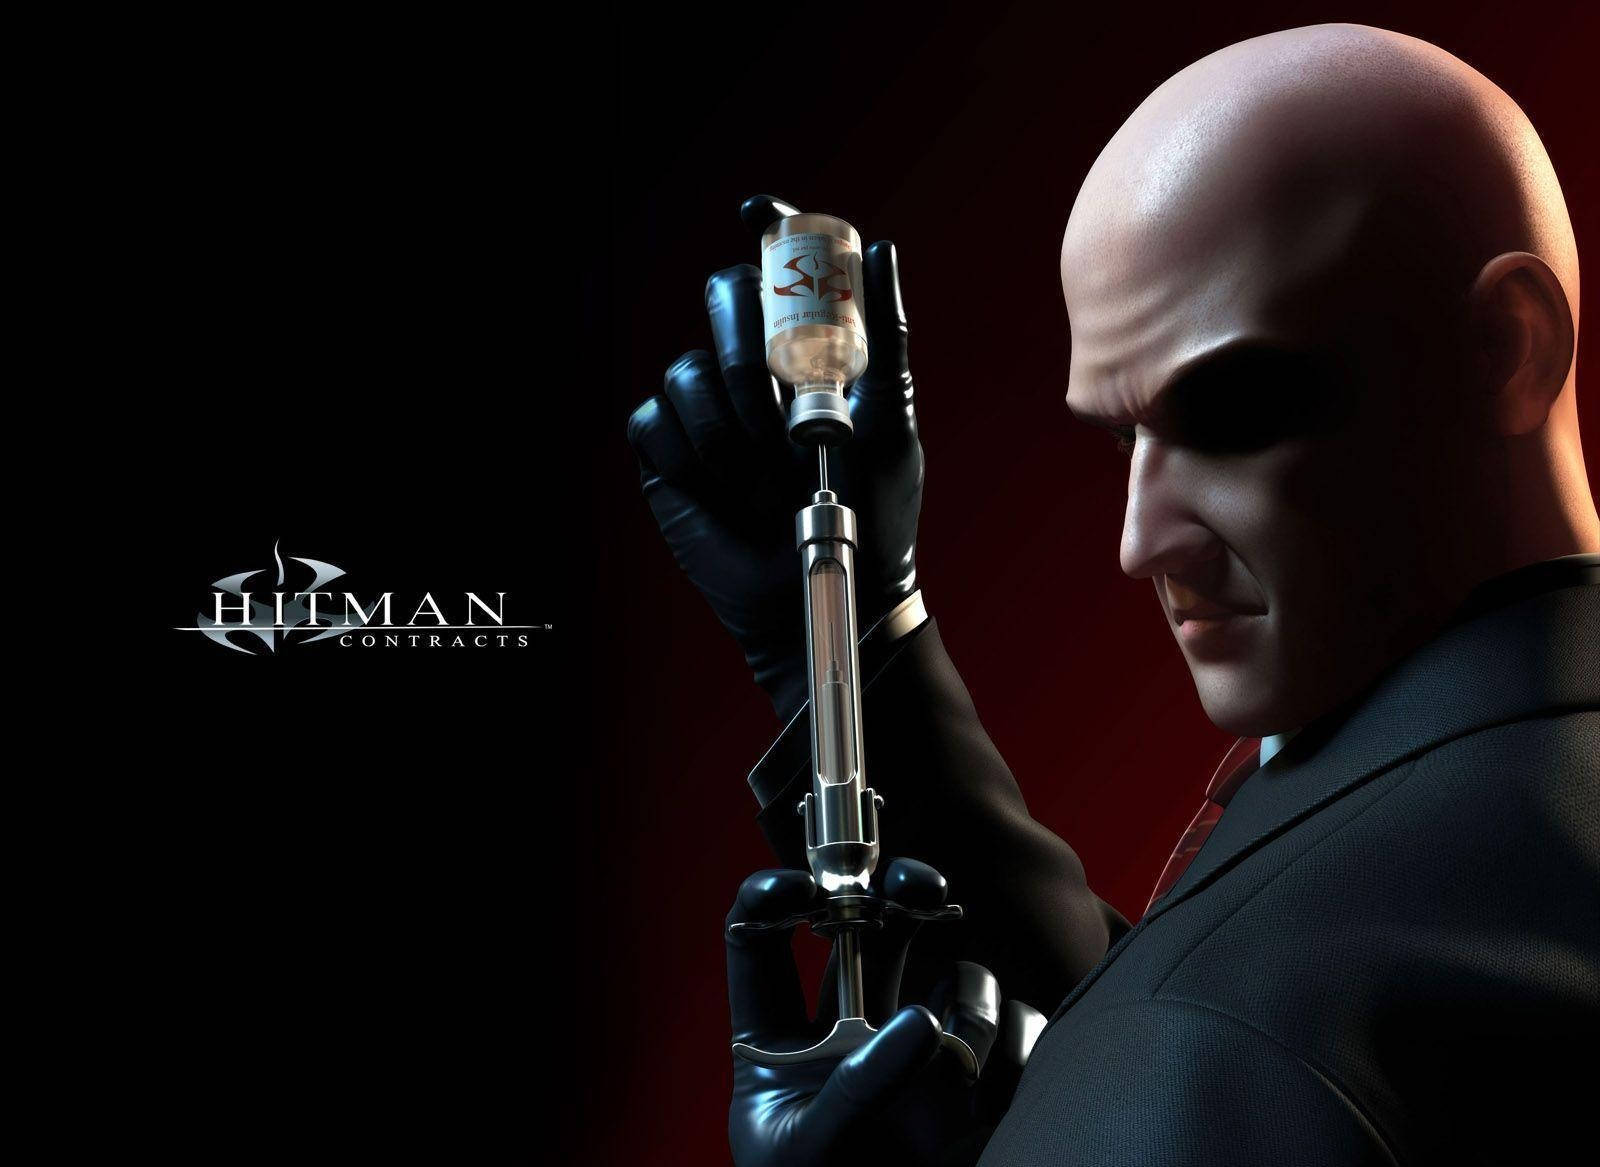 No 48 With Antidote Hitman Contracts Poster Wallpaper